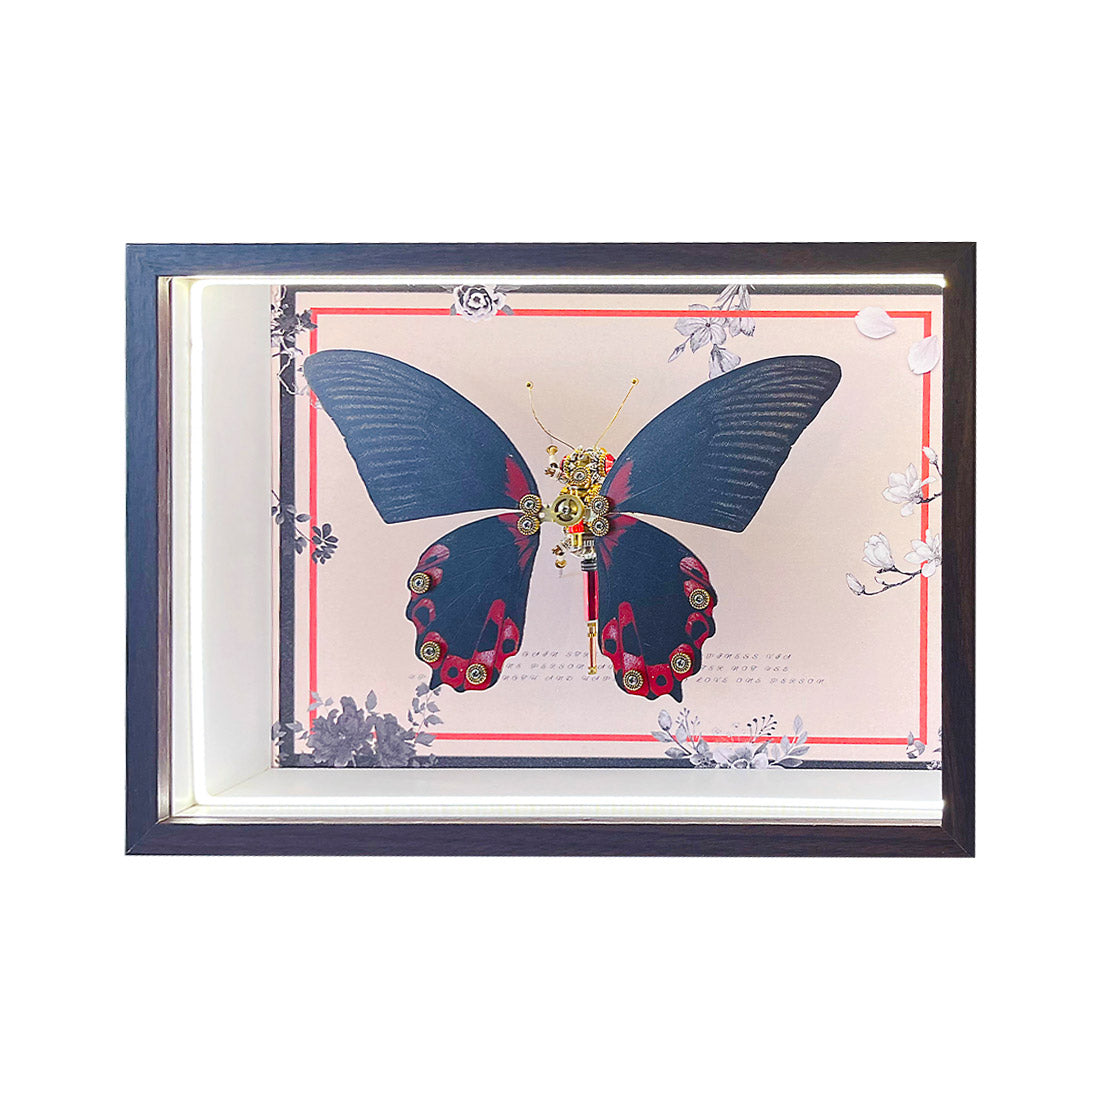 Steampunk Swallowtail Butterfly 3D Metal Puzzle Kits with Circuit Board Frame